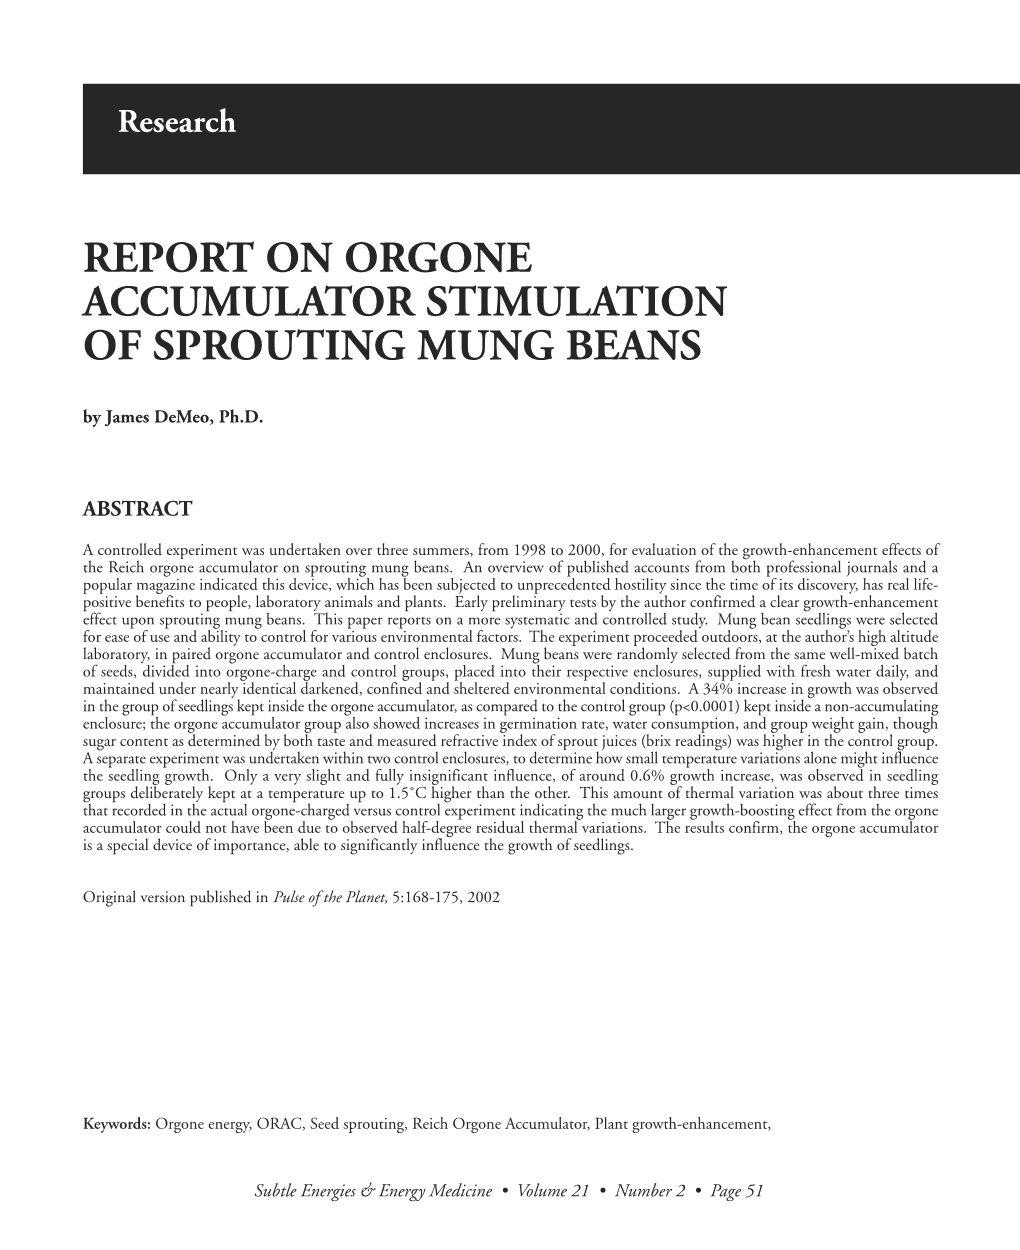 REPORT on ORGONE ACCUMULATOR STIMULATION of SPROUTING MUNG BEANS by James Demeo, Ph.D